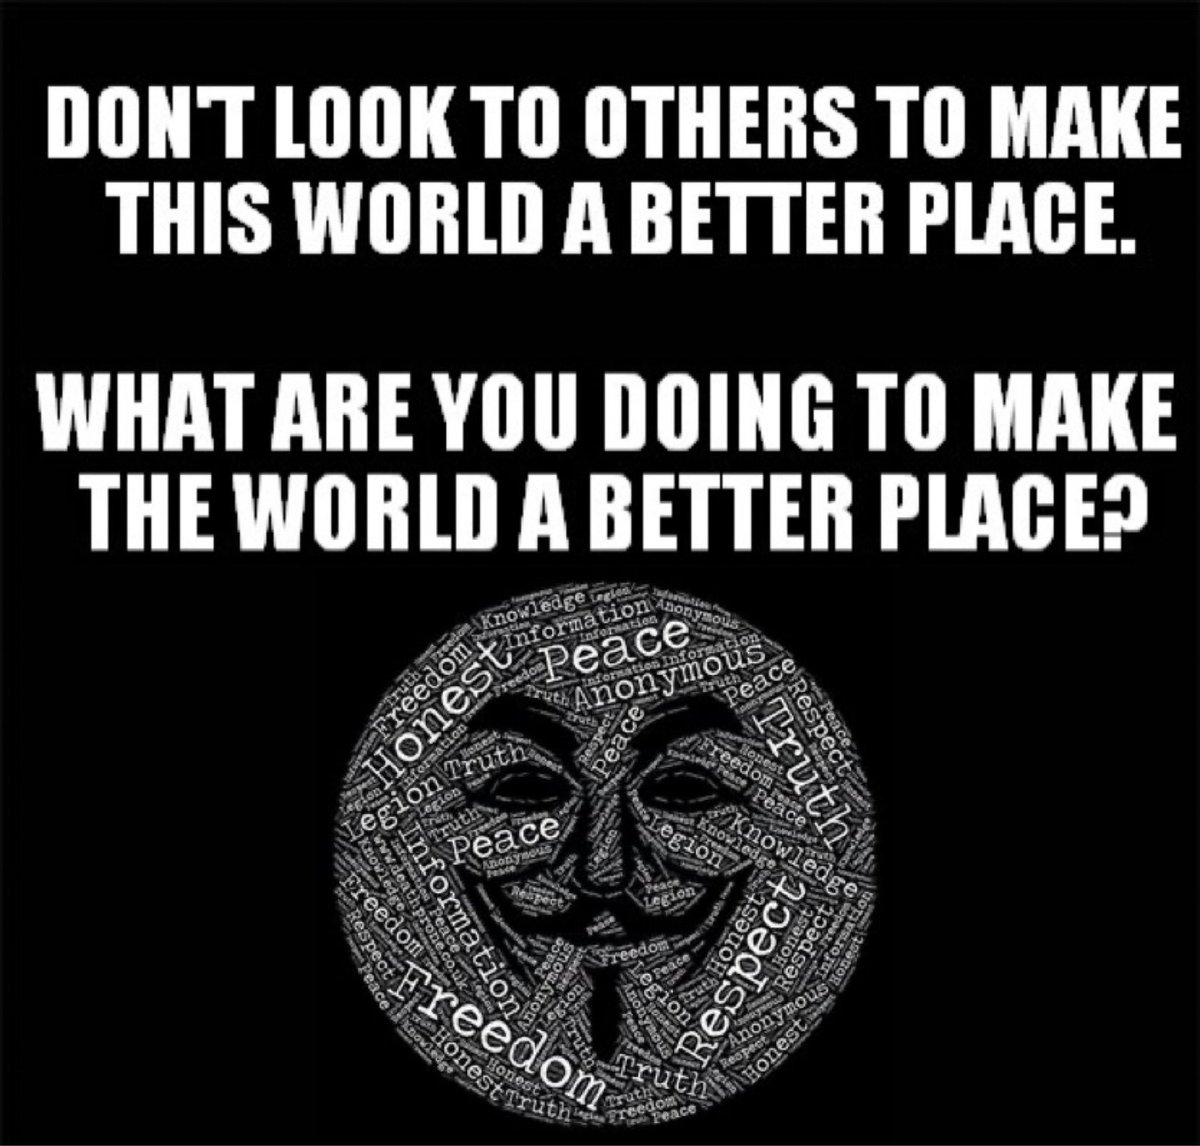 Y’all wanna fight, bitch, complain, gossip, hate, cause discord and mass destruction. I choose love, compassion, empathy, understanding and mass construction 
We are not the same 
#ABetterWorldIsPossible #Anonymous